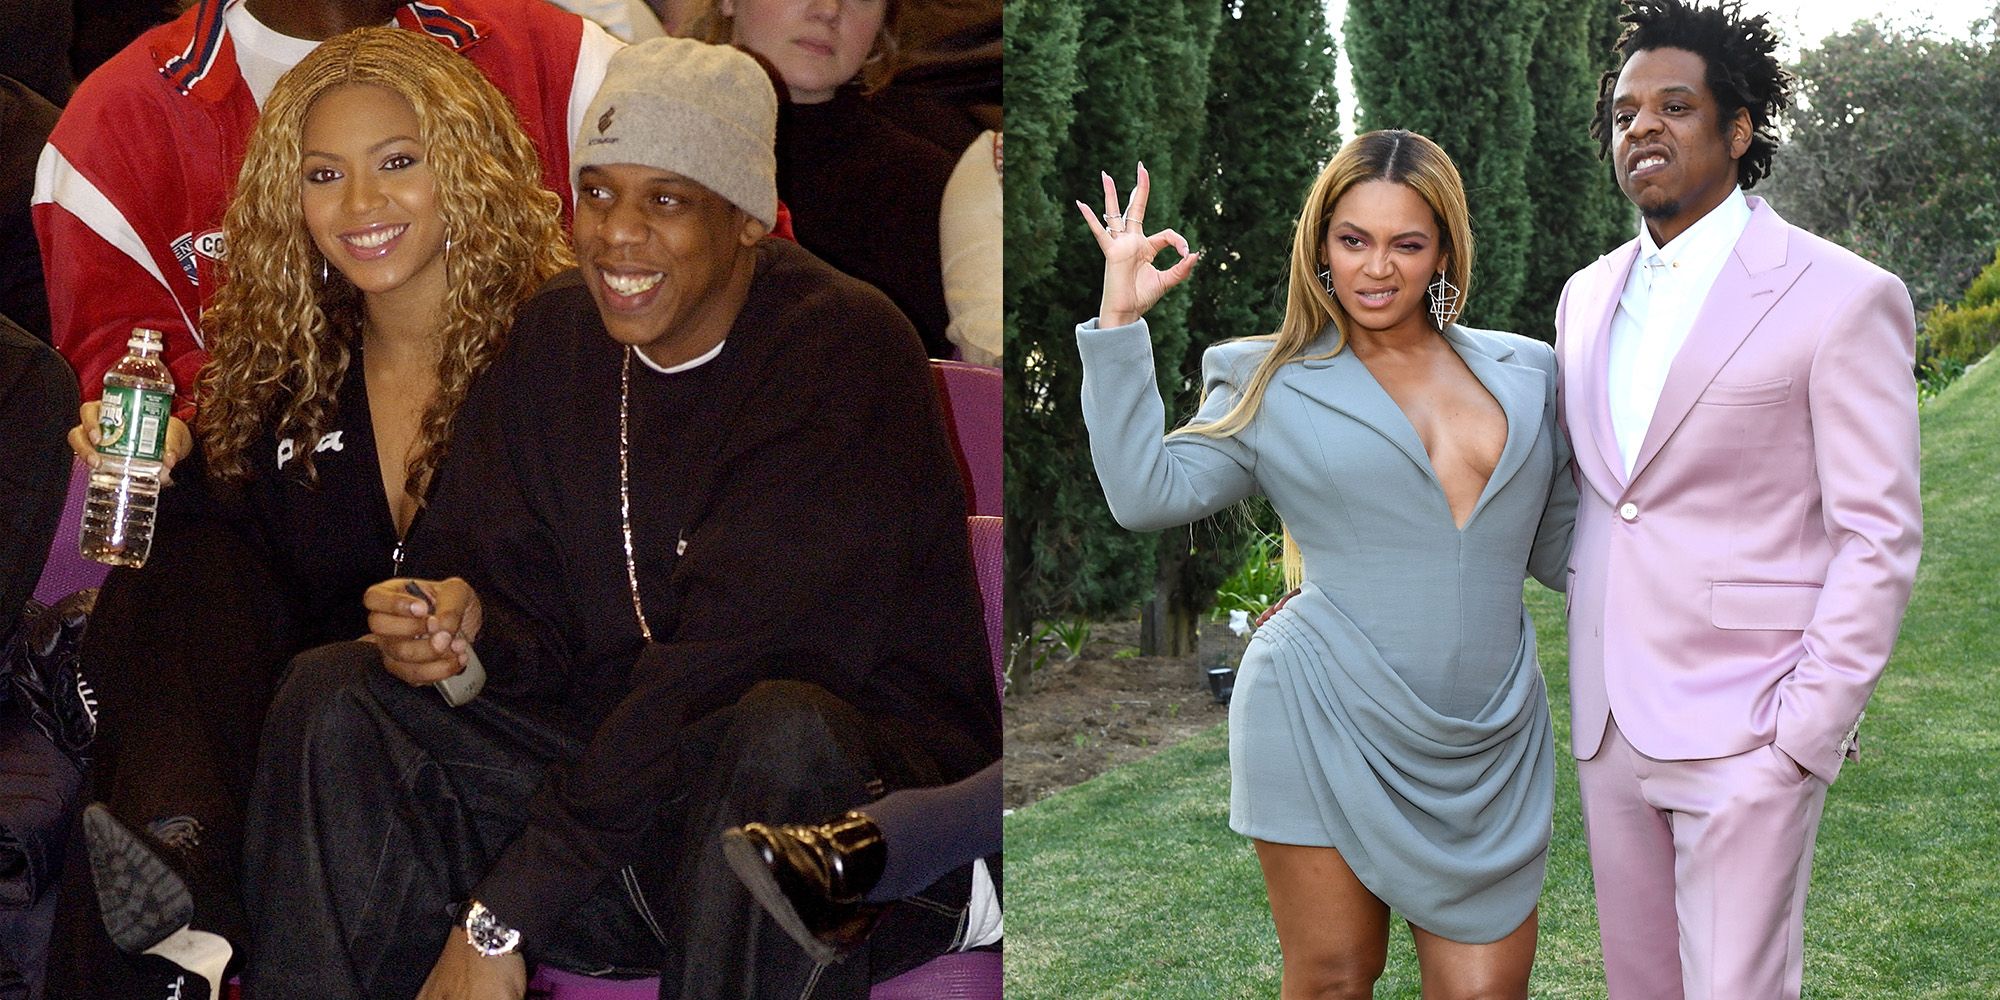 Celebrity Couples When They First Debuted Versus Now